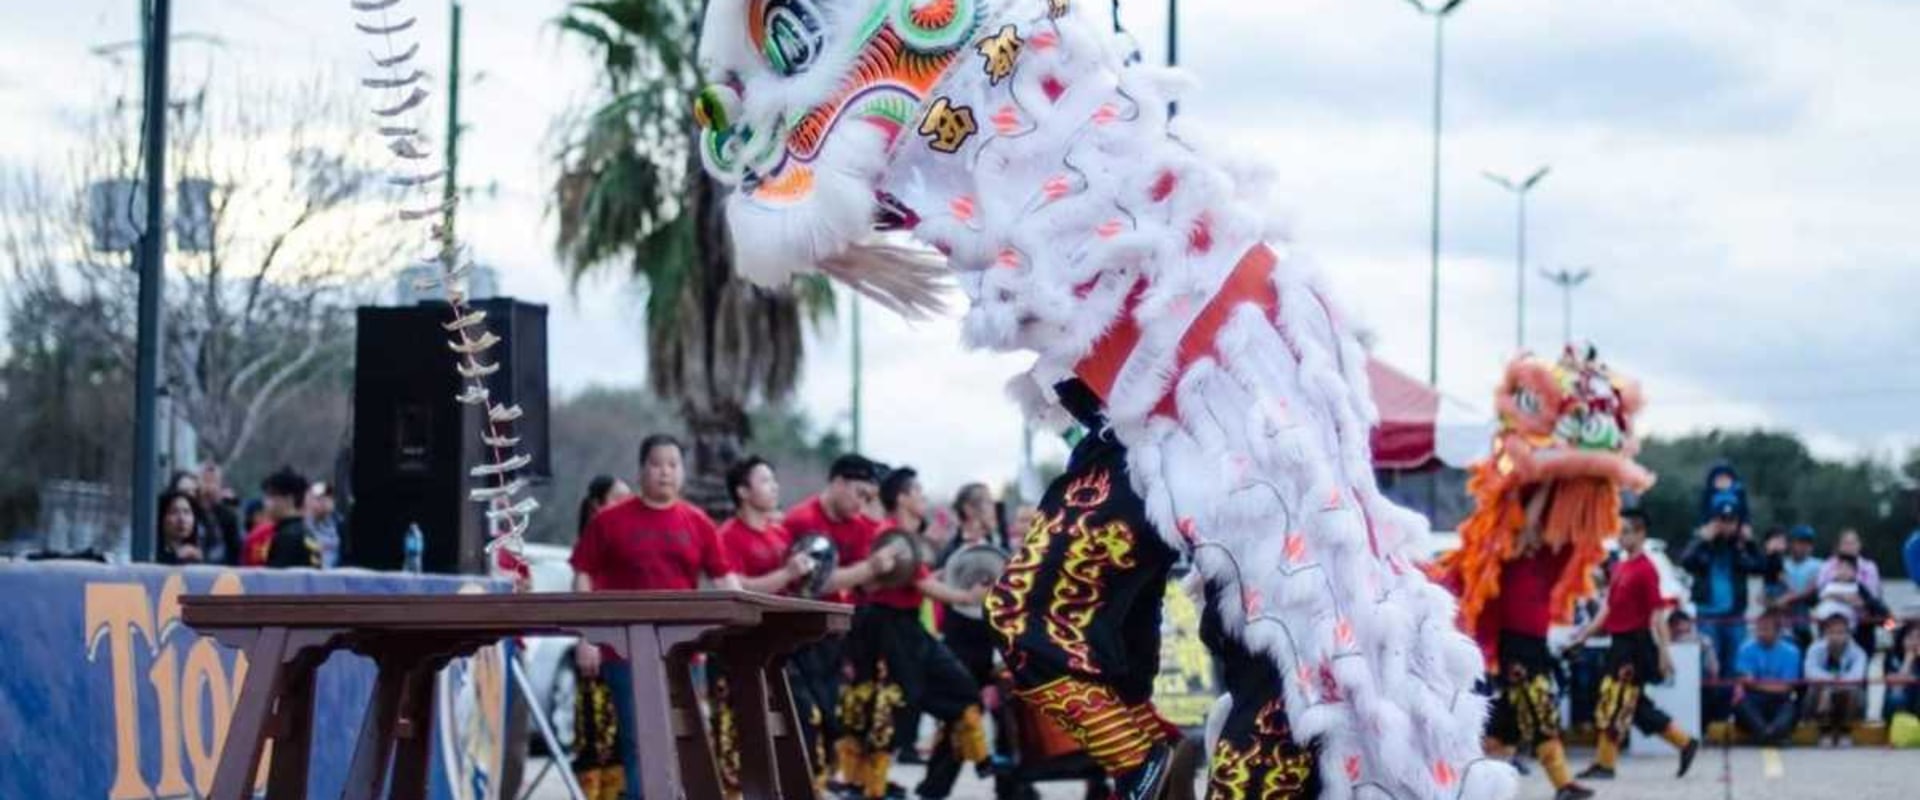 Experience the Vibrant Culture of Harris County, TX through its Festivals